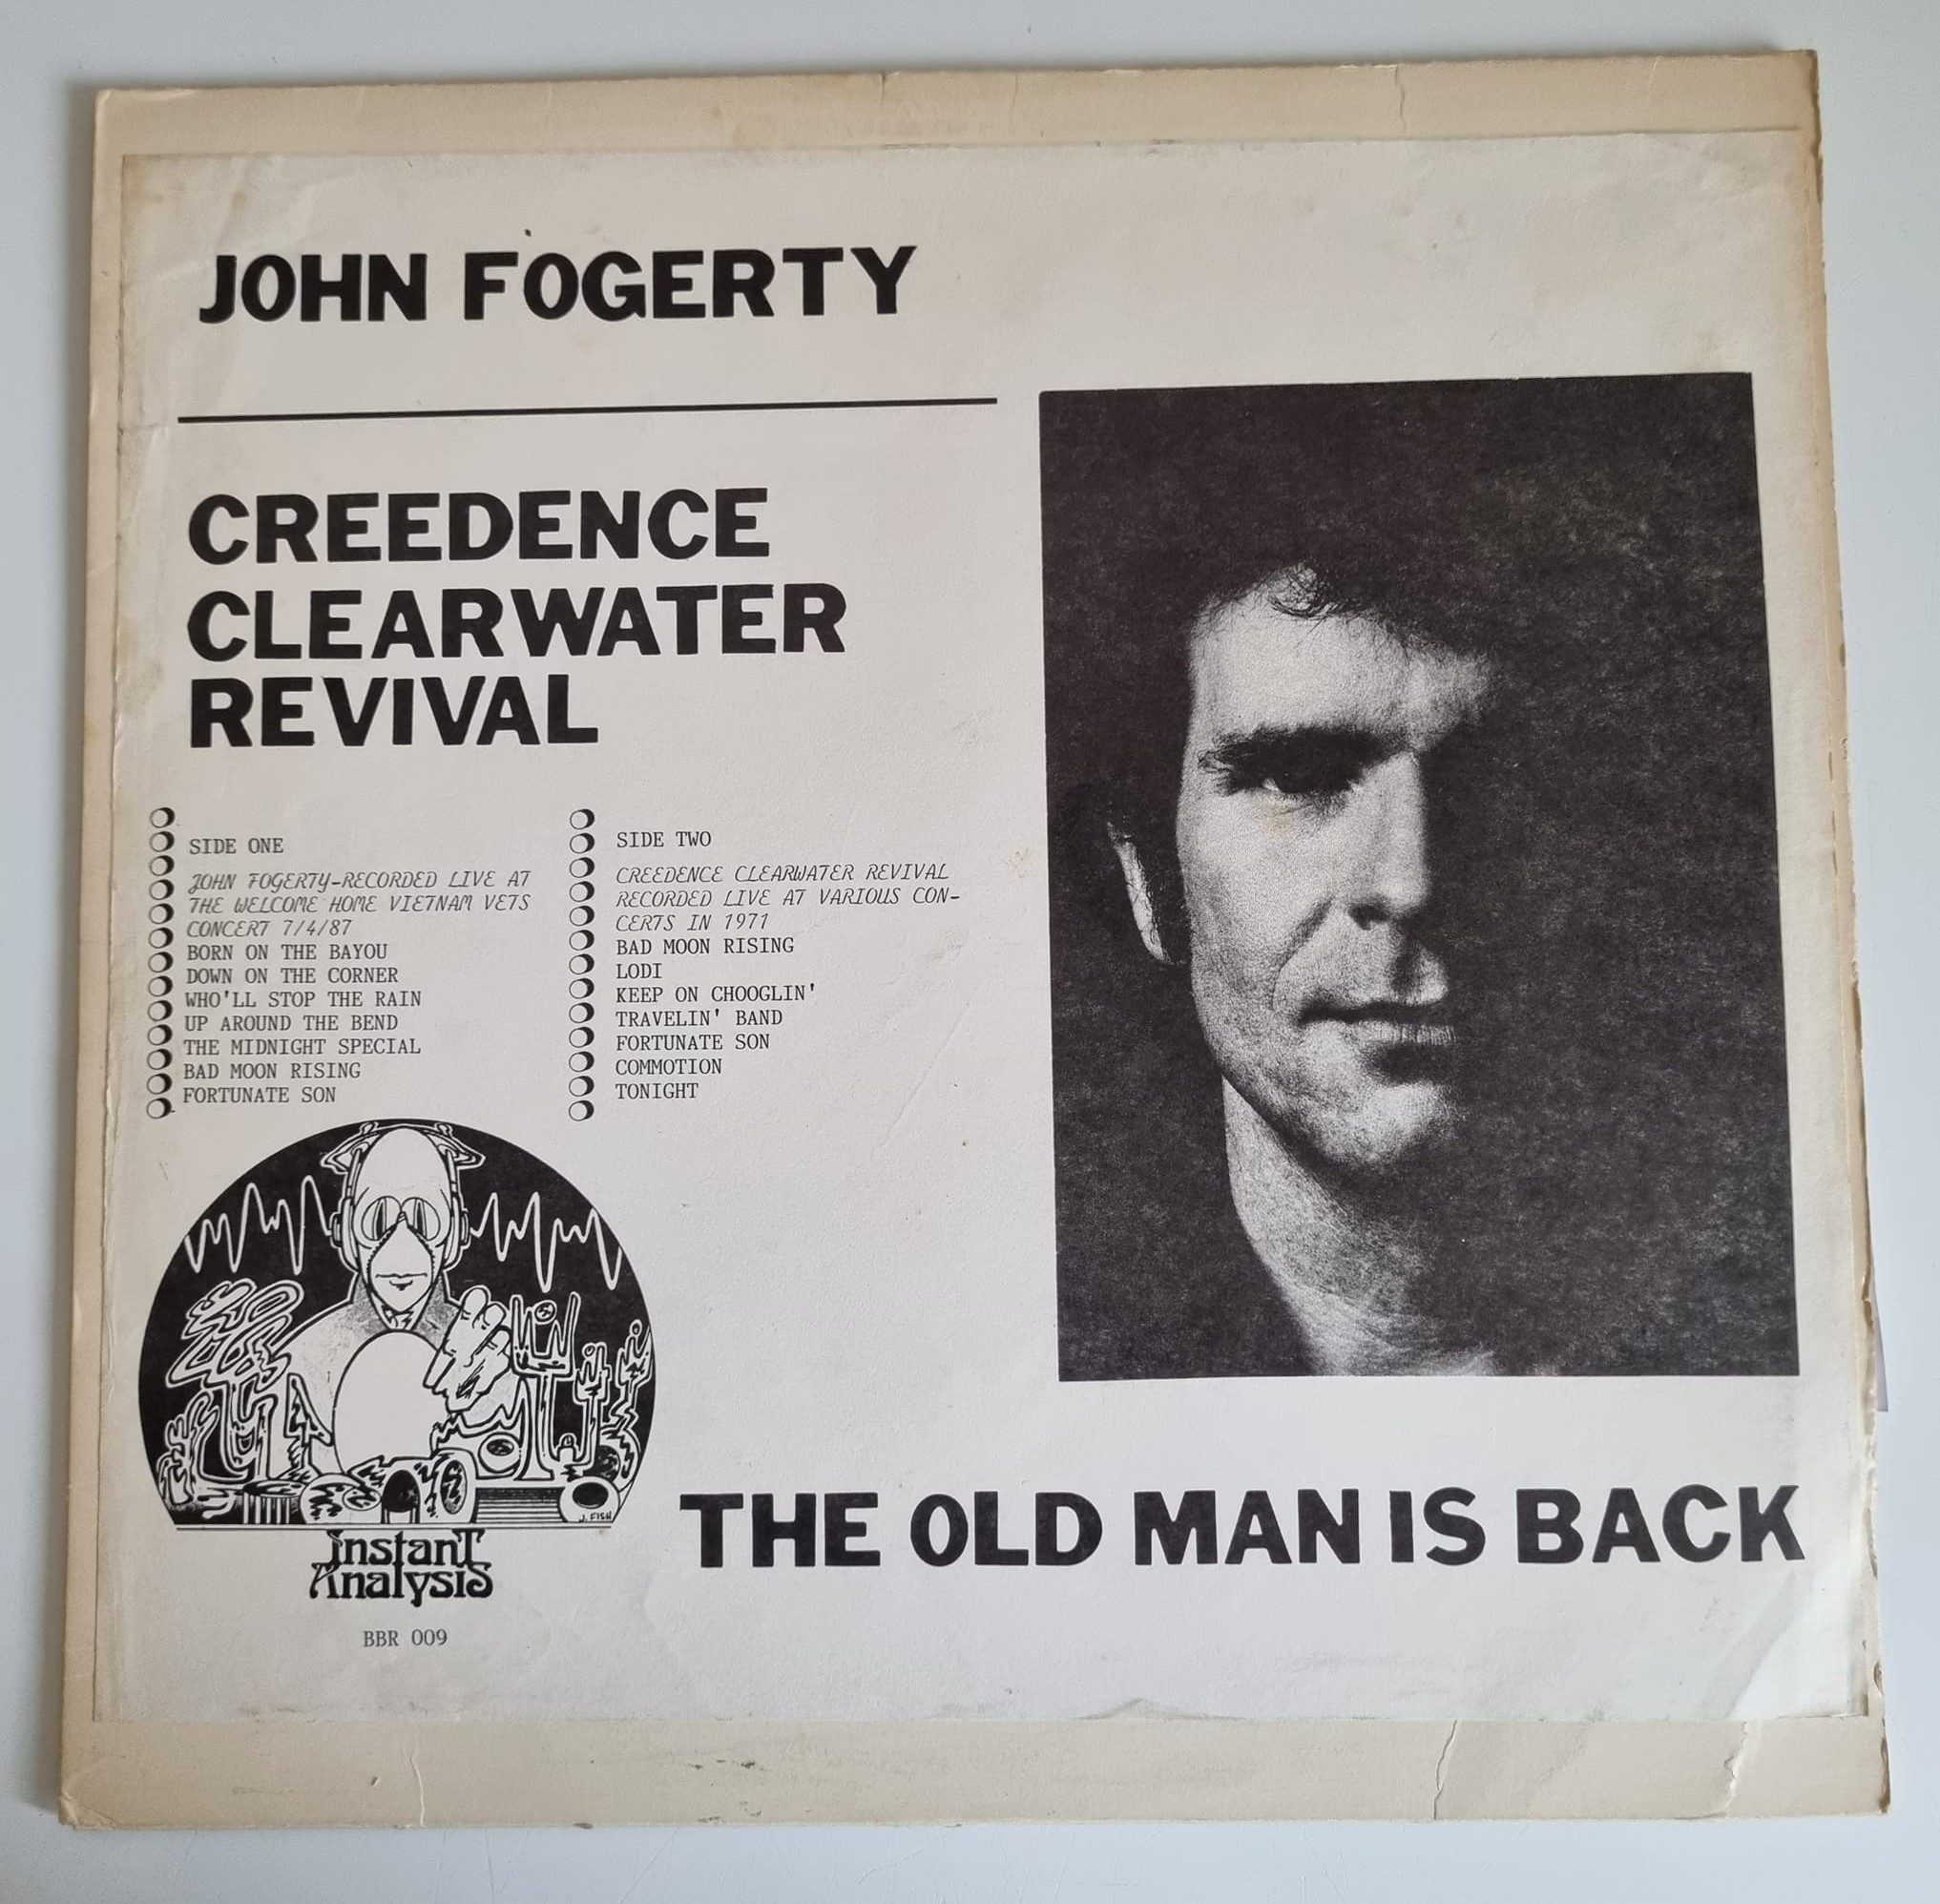 Buy this rare John Fogerty & Credence Clearwater Revival record by clicking here